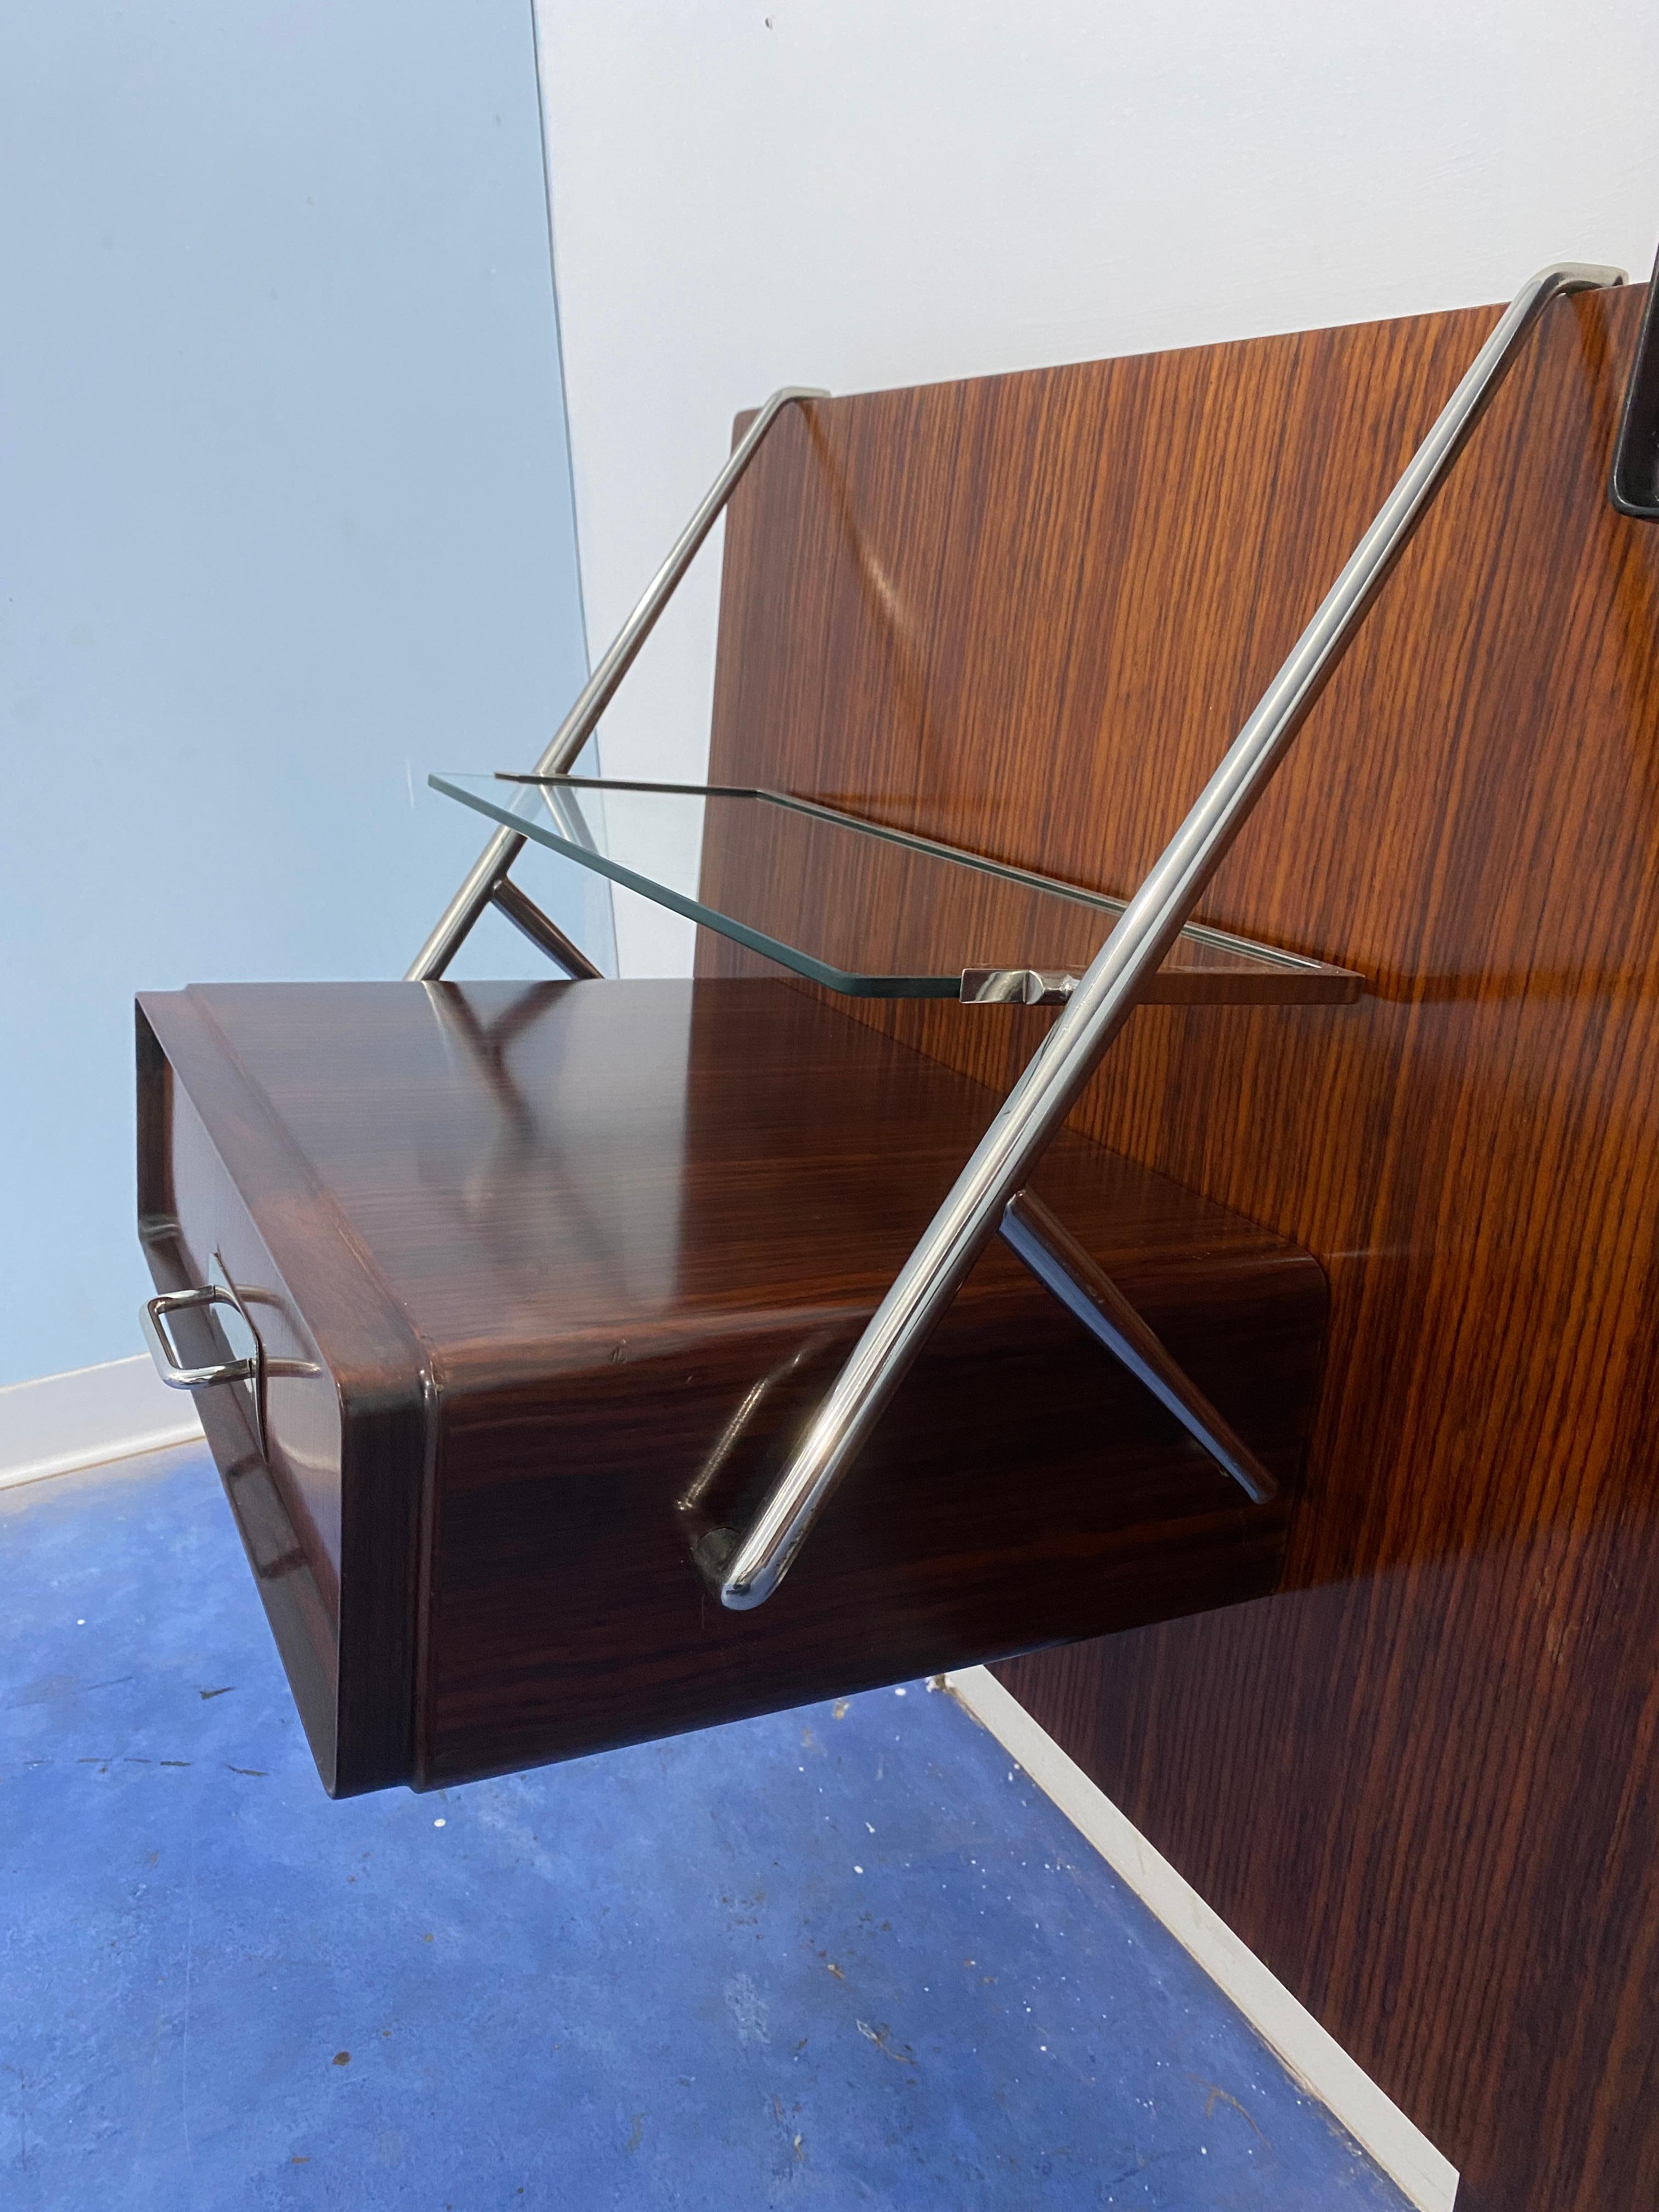 Italian nightstands from the 1950s with headboard bed designed by Silvio Cavatorta 9